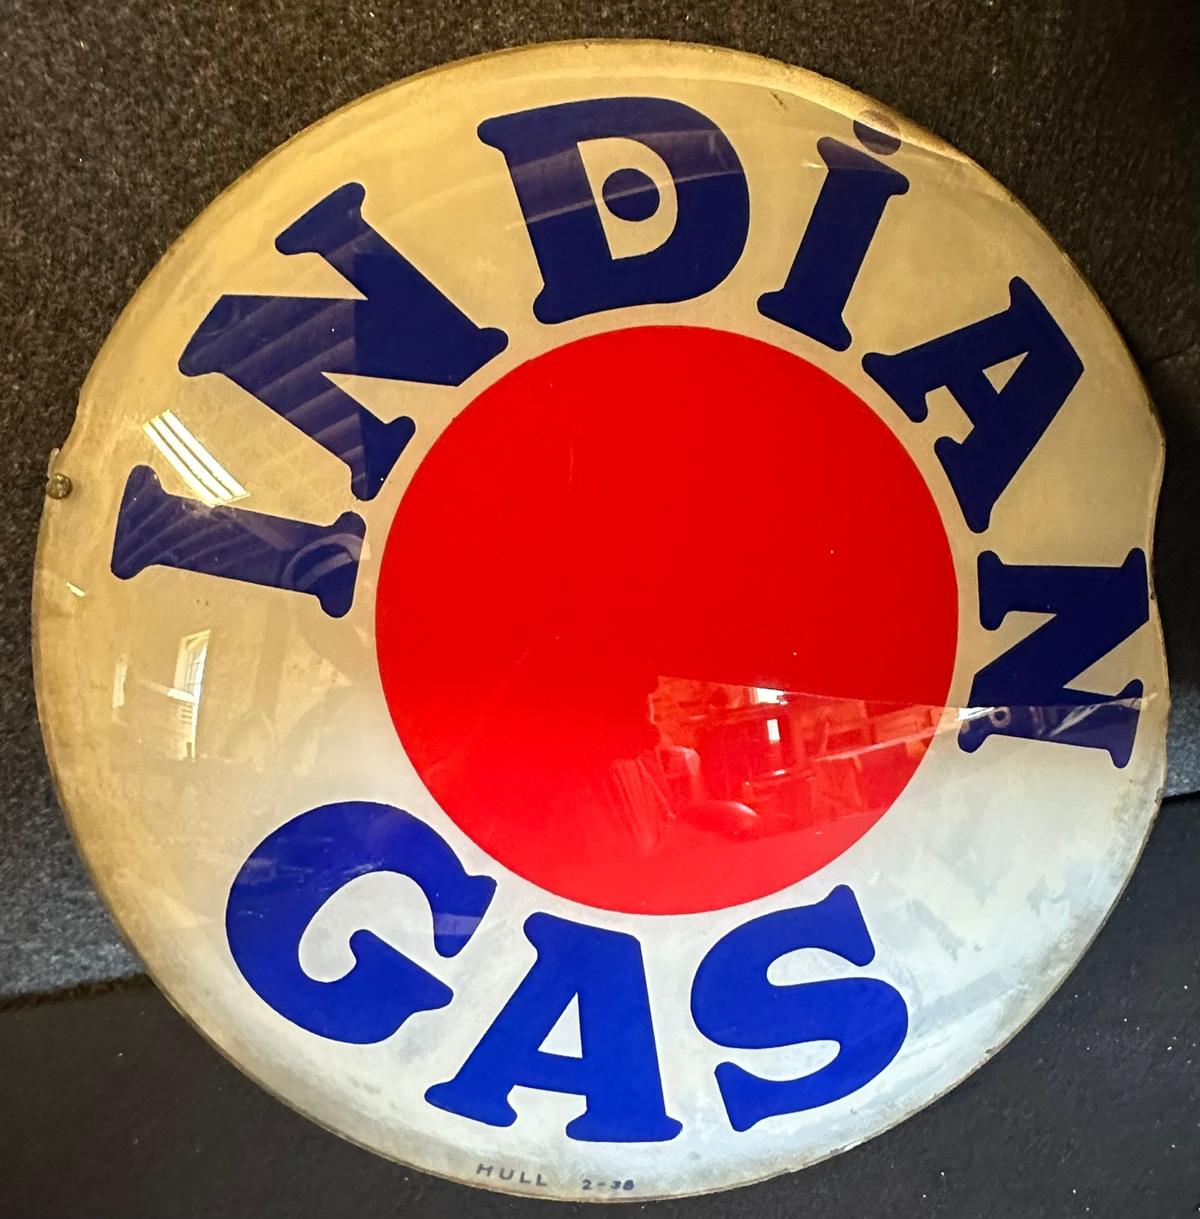 Indian Gas Single Glass 13.5" Gas Pump Globe Lense by Hull Dated February 1938